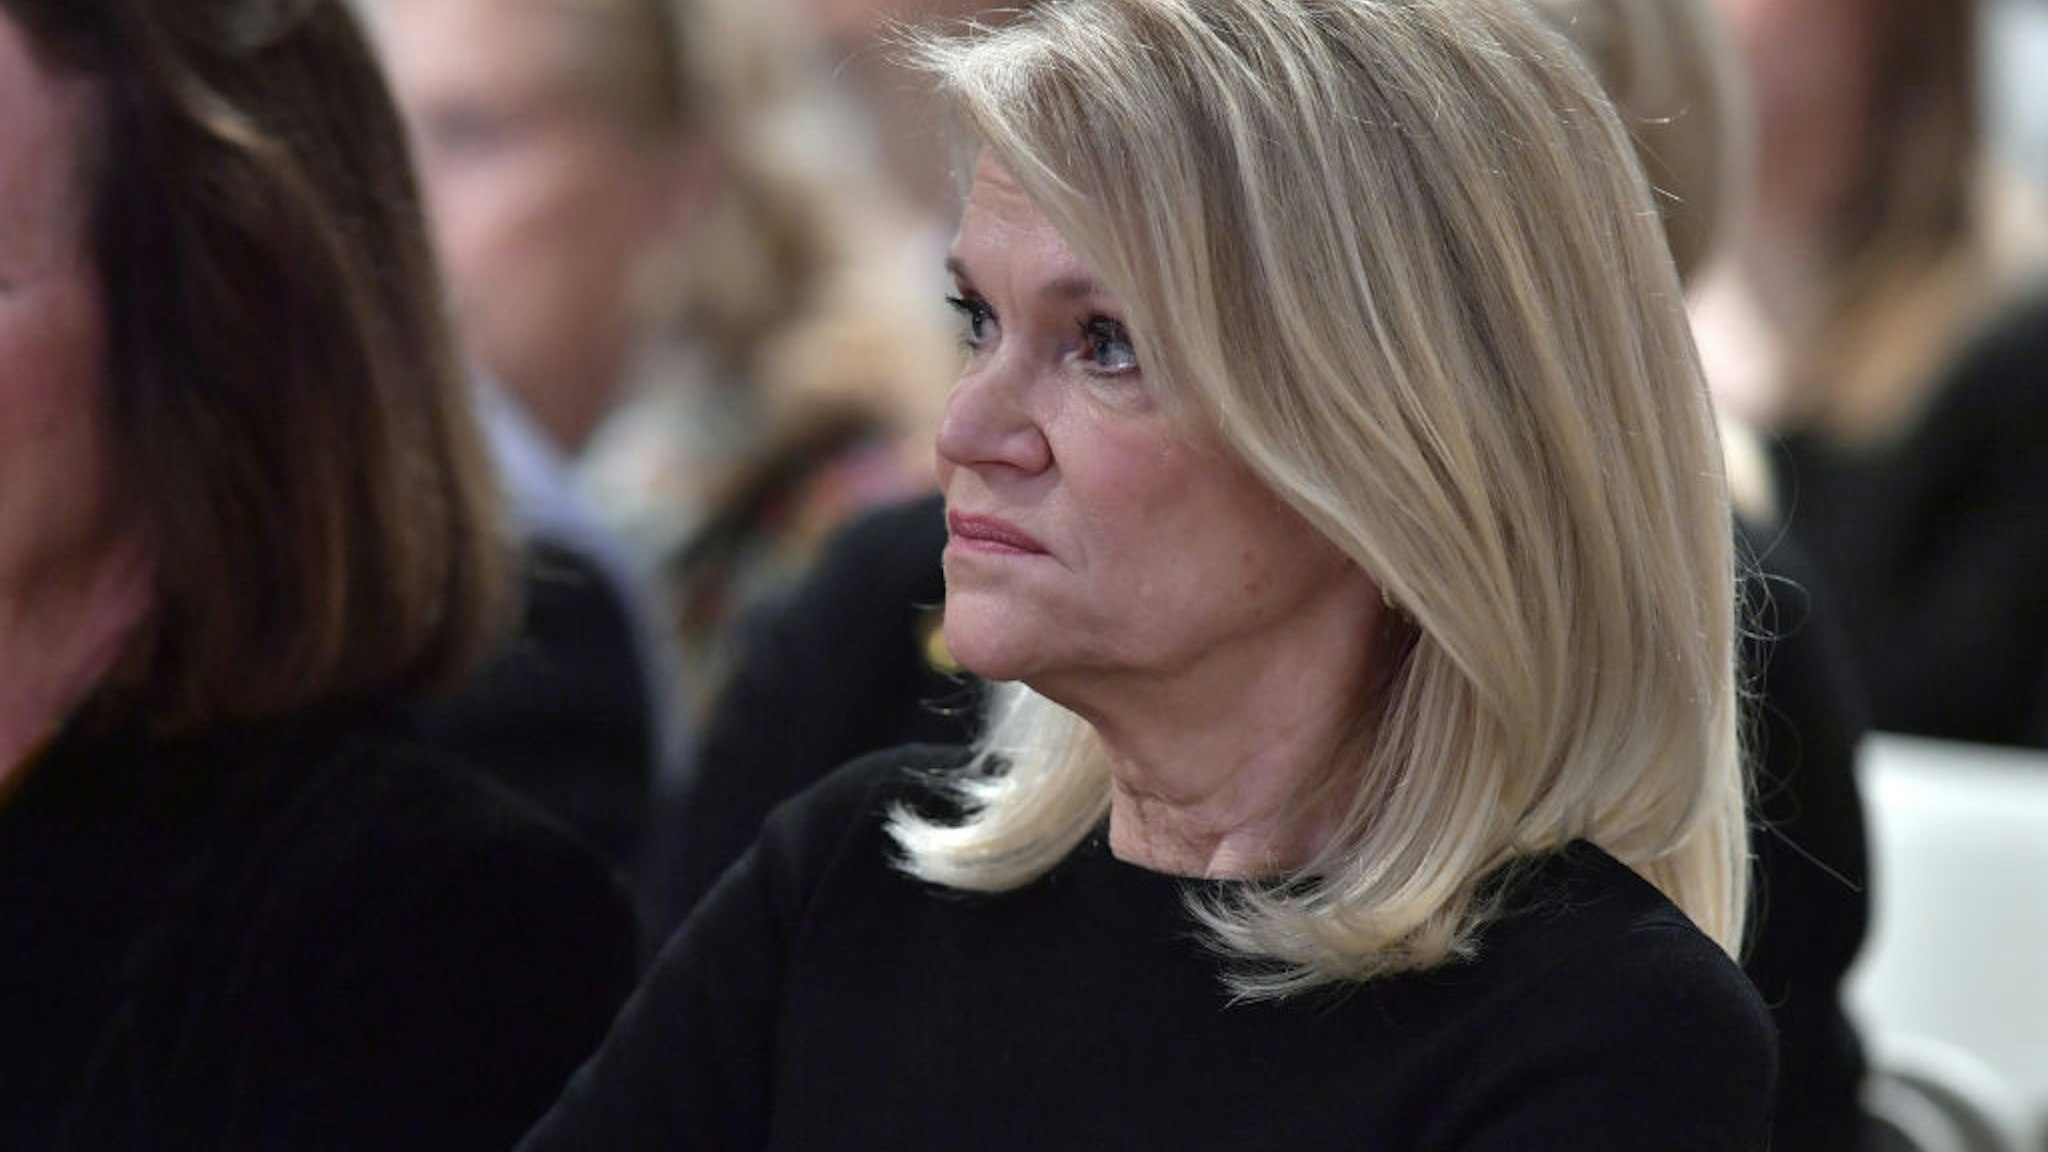 Martha Raddatz receives the Goldsmith Career Award for Excellence in Journalism at Harvard University' Shorenstein Center on Media, Politics and Public Policy on March 6, 2018 in Cambridge, Massachusetts.